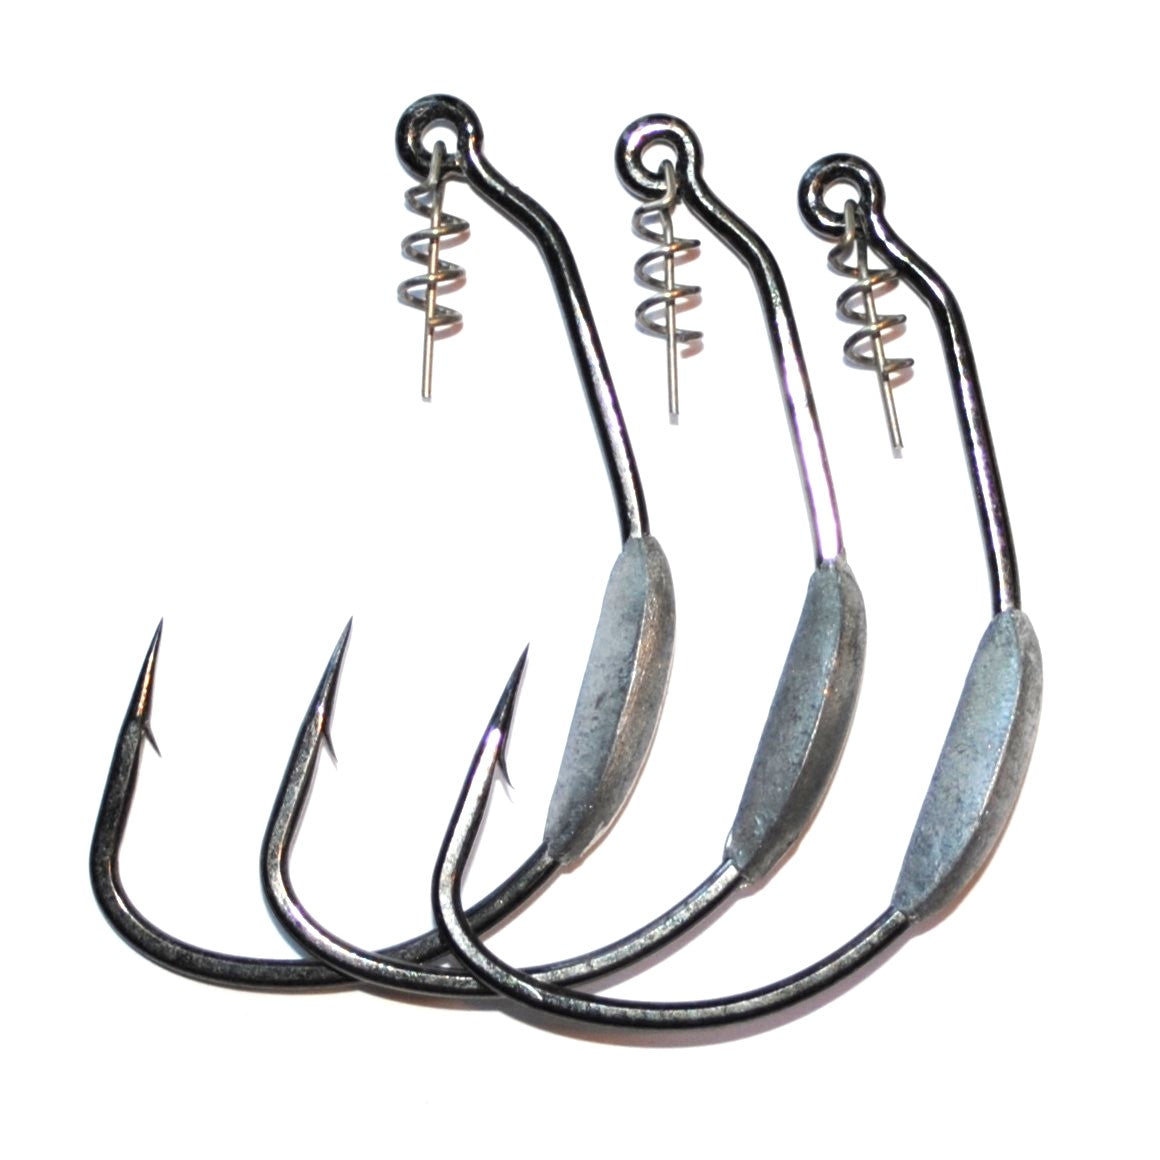 MIKADO CAT TERRITORY Bent Nose Extra Strong Wels Catfish Hooks Size 8/0 –  Pack of 4